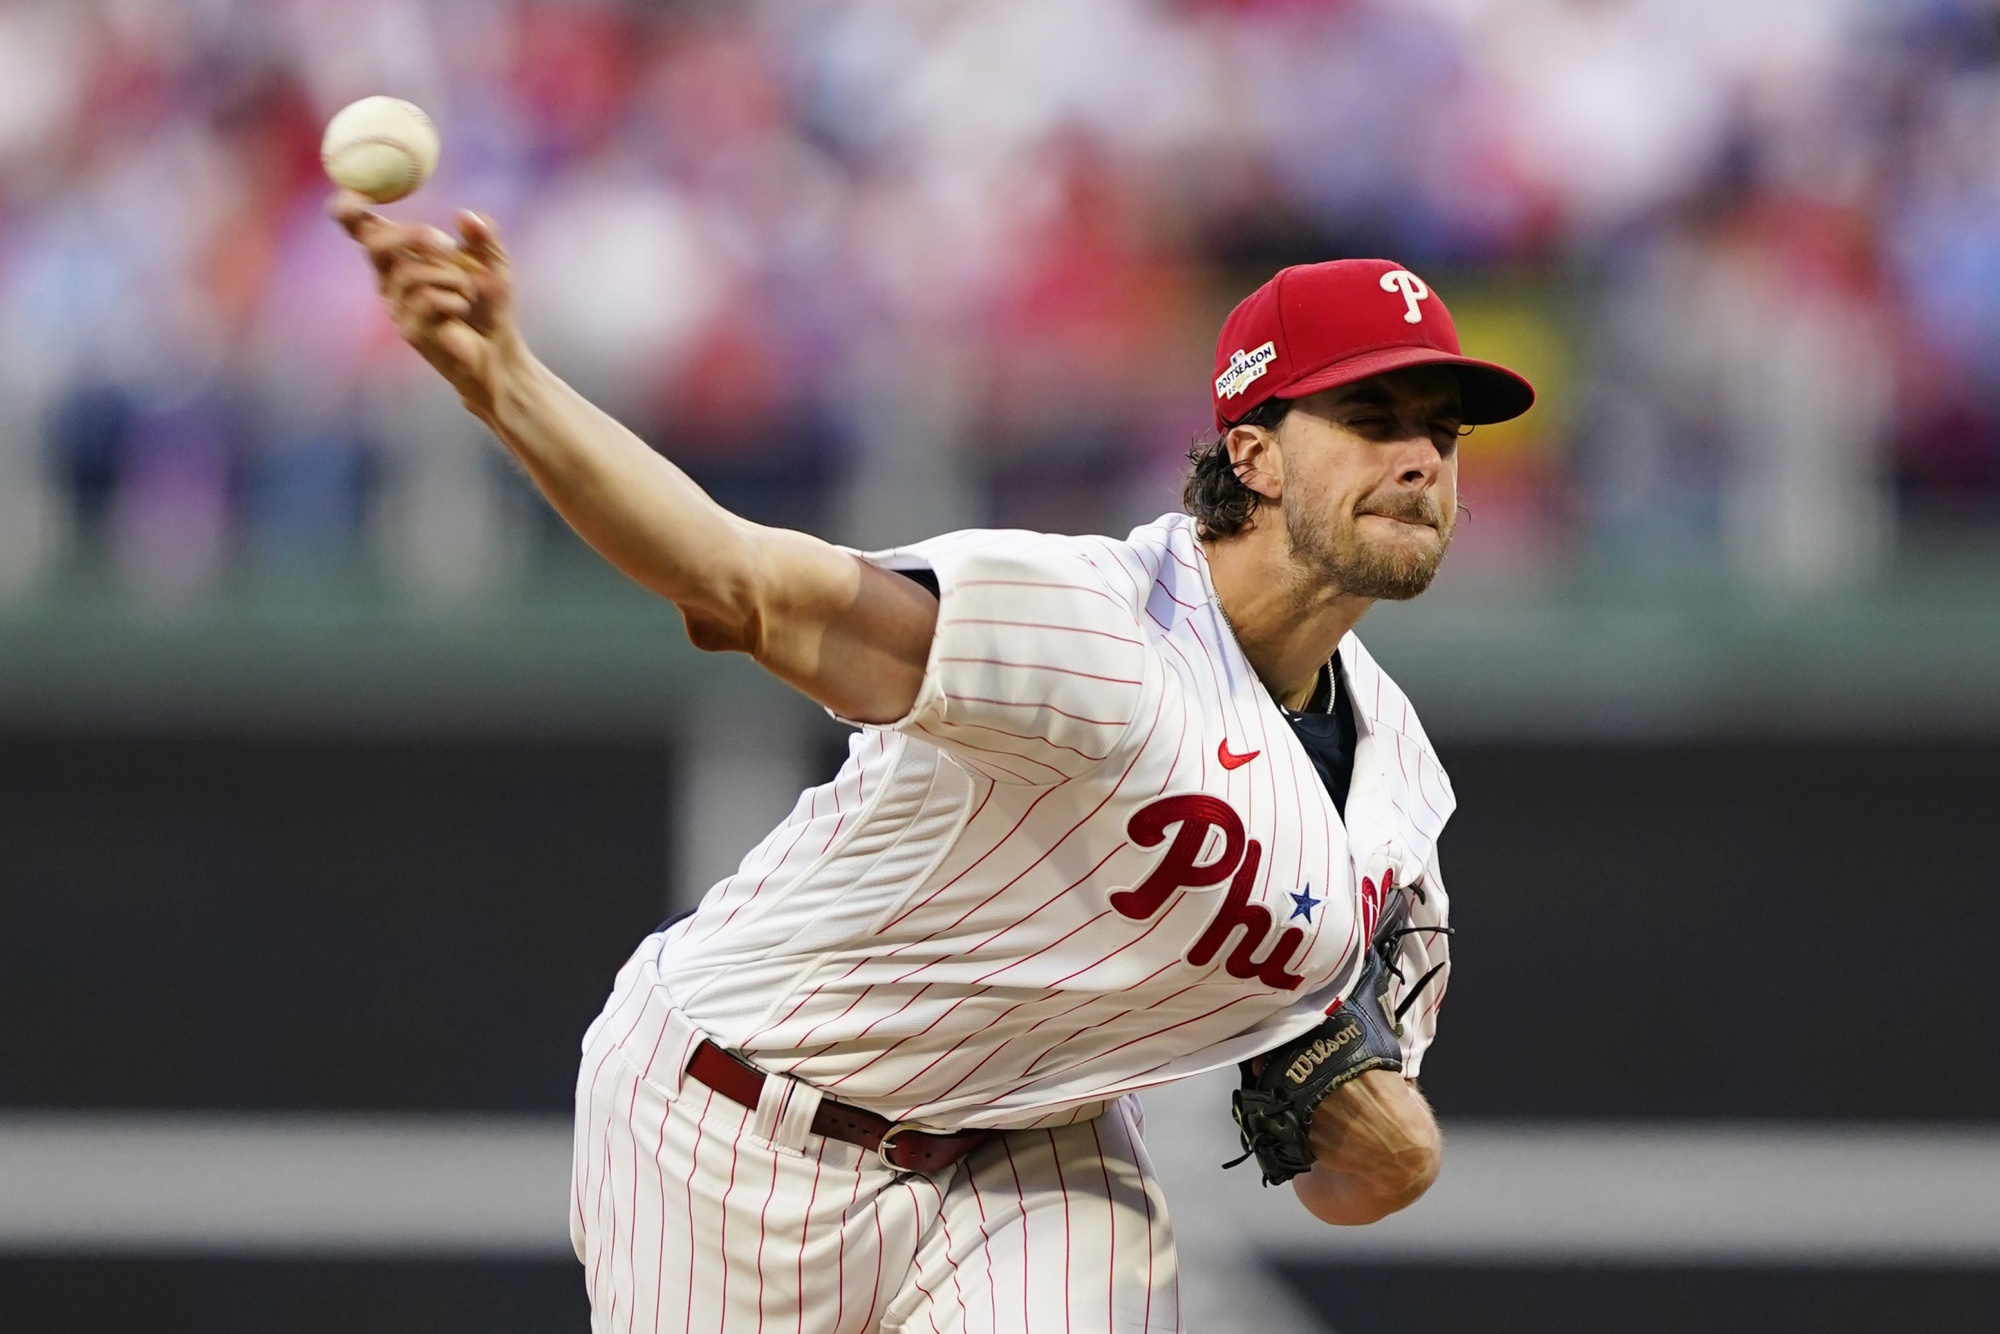 Brotherly love? Not so much between Aaron Nola and Austin Nola during NLCS